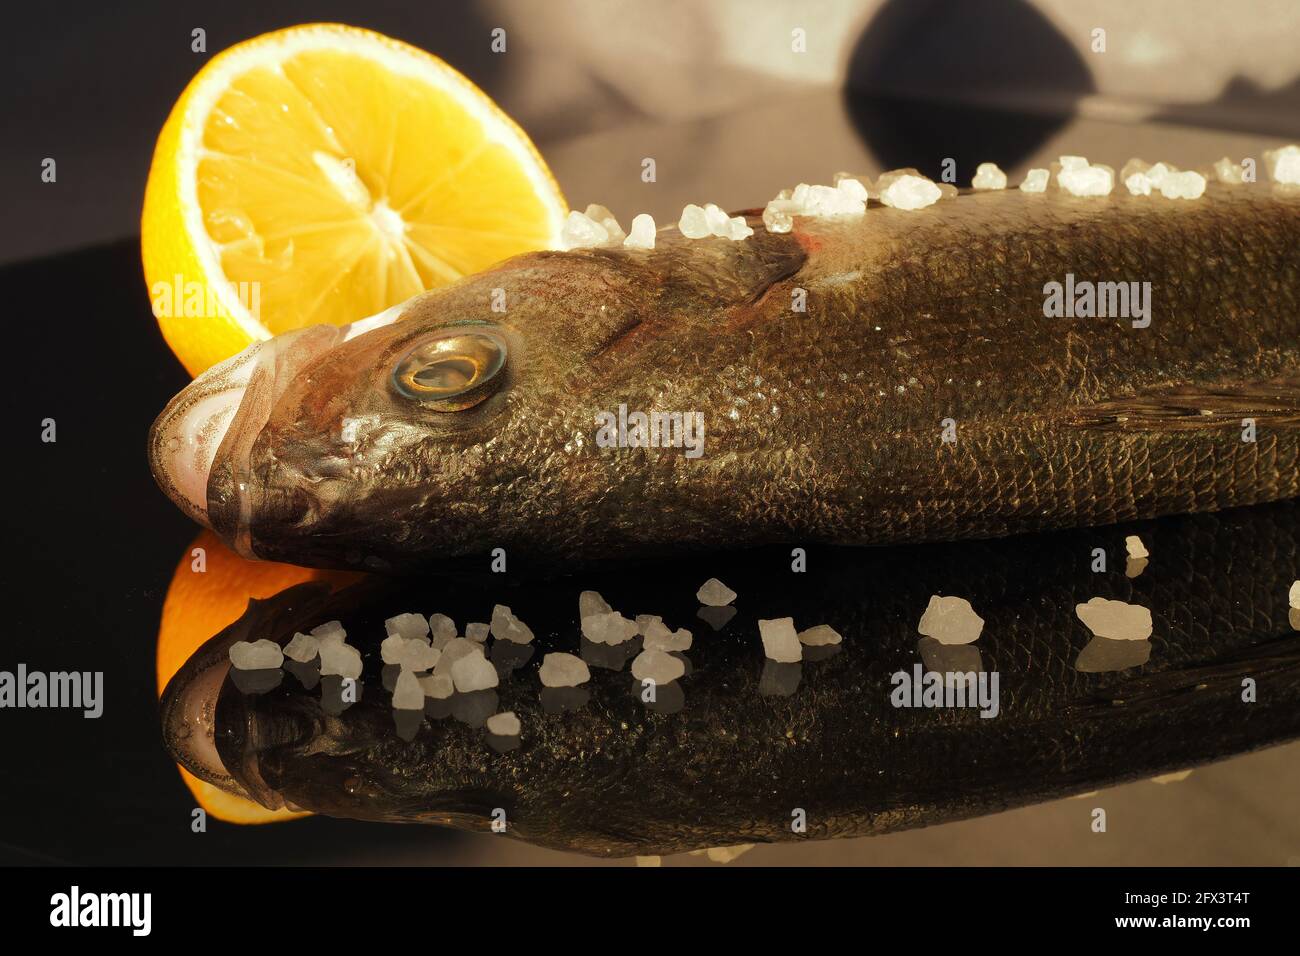 Seabass fish close-up with lemon on a glass reflective surface. Stock Photo